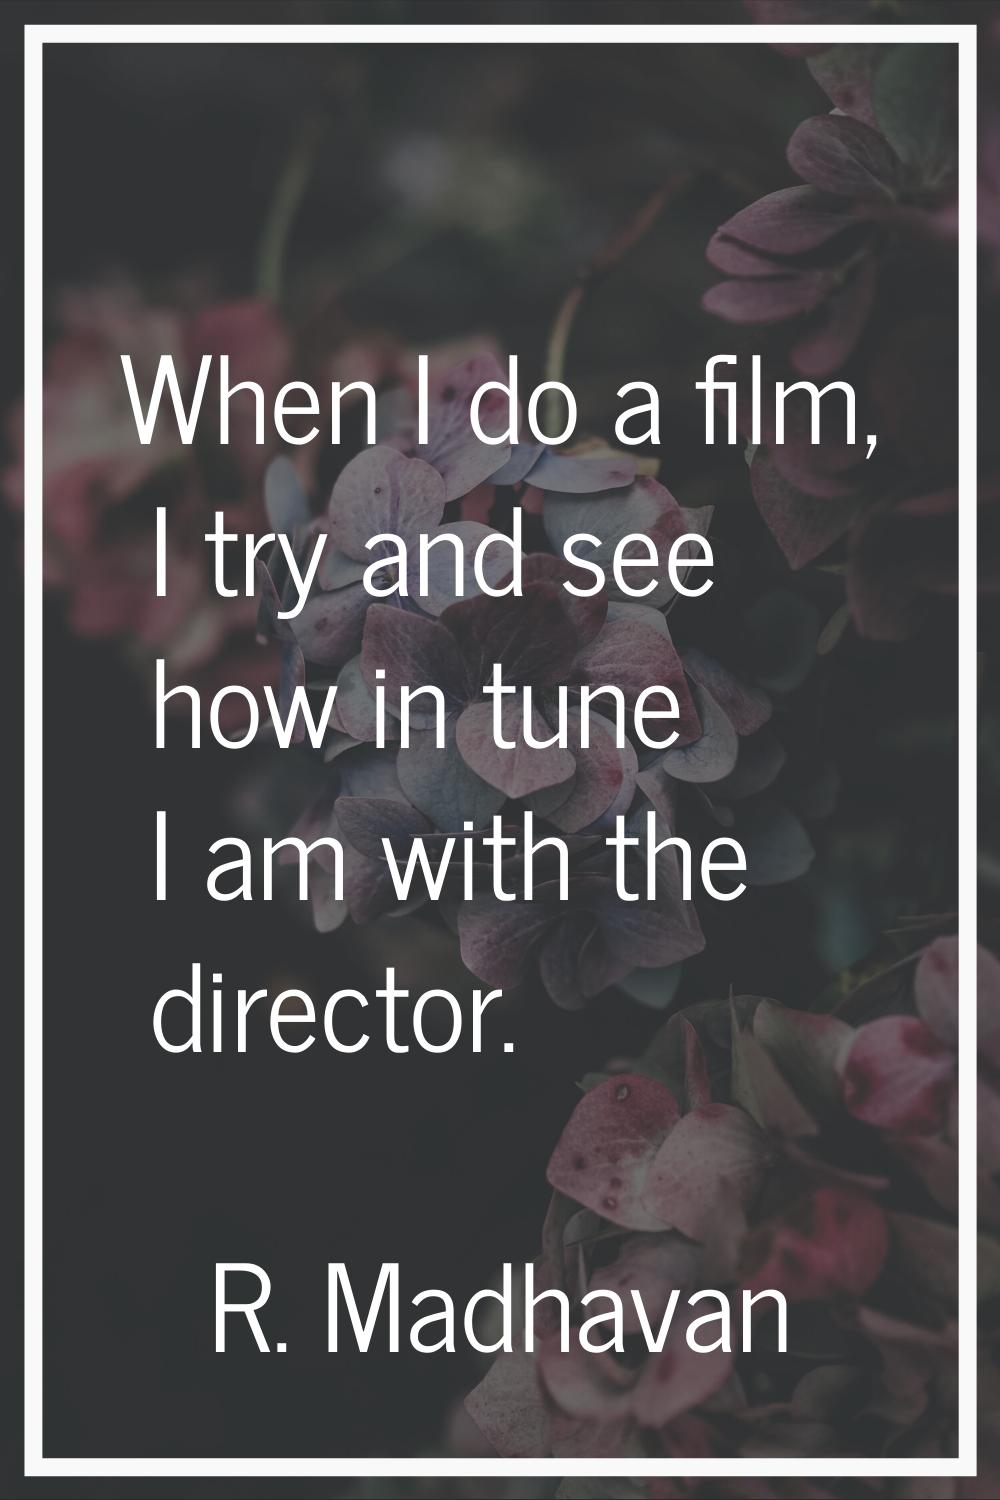 When I do a film, I try and see how in tune I am with the director.